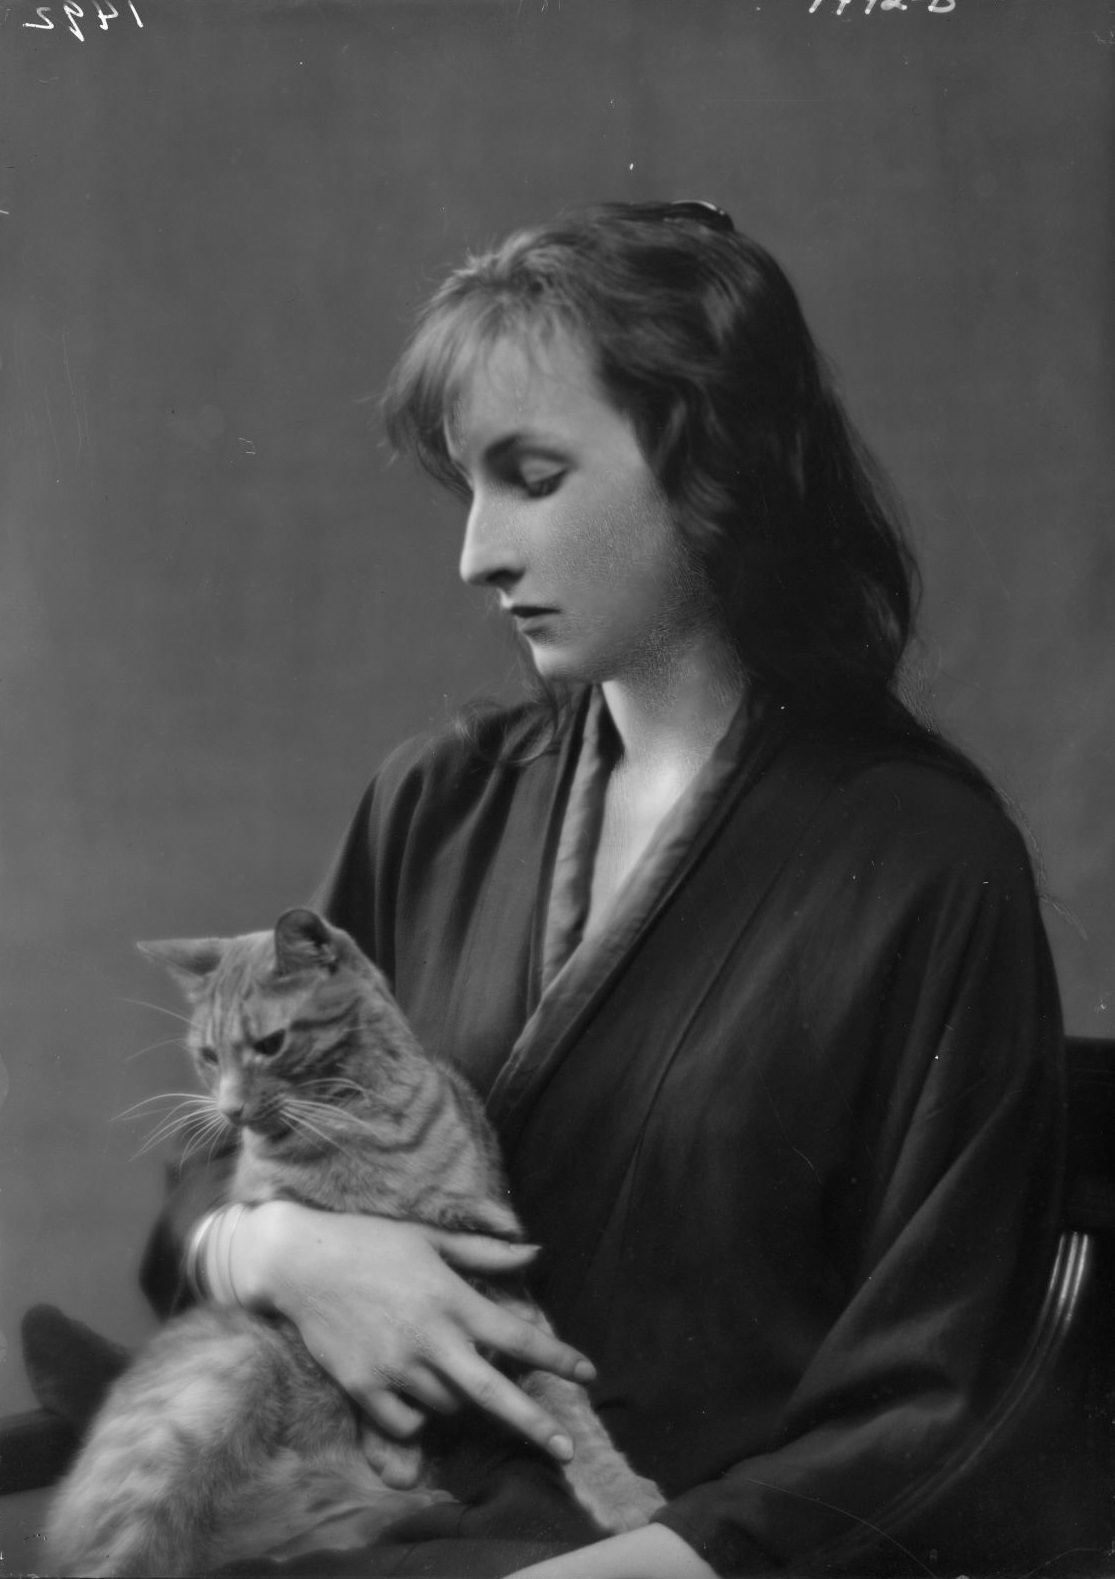 Buzzer the Studio Cat: A Photographer Used His Cuddly Cat as Adorable Prop In the 1900s